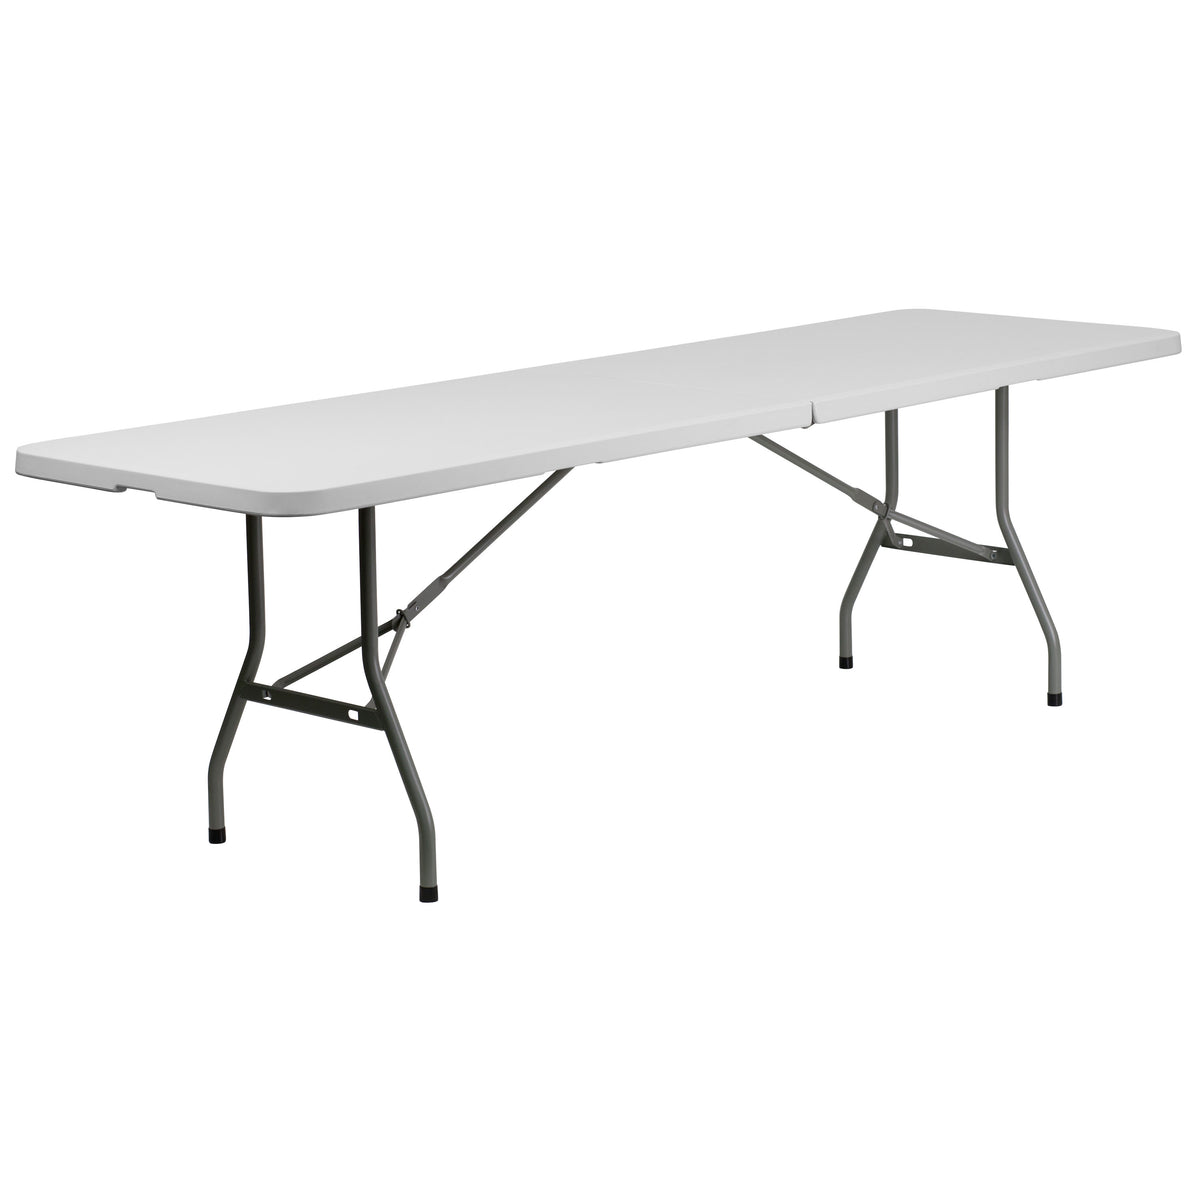 8-Foot Bi-Fold Granite White Plastic Banquet and Event Folding Table with Handle